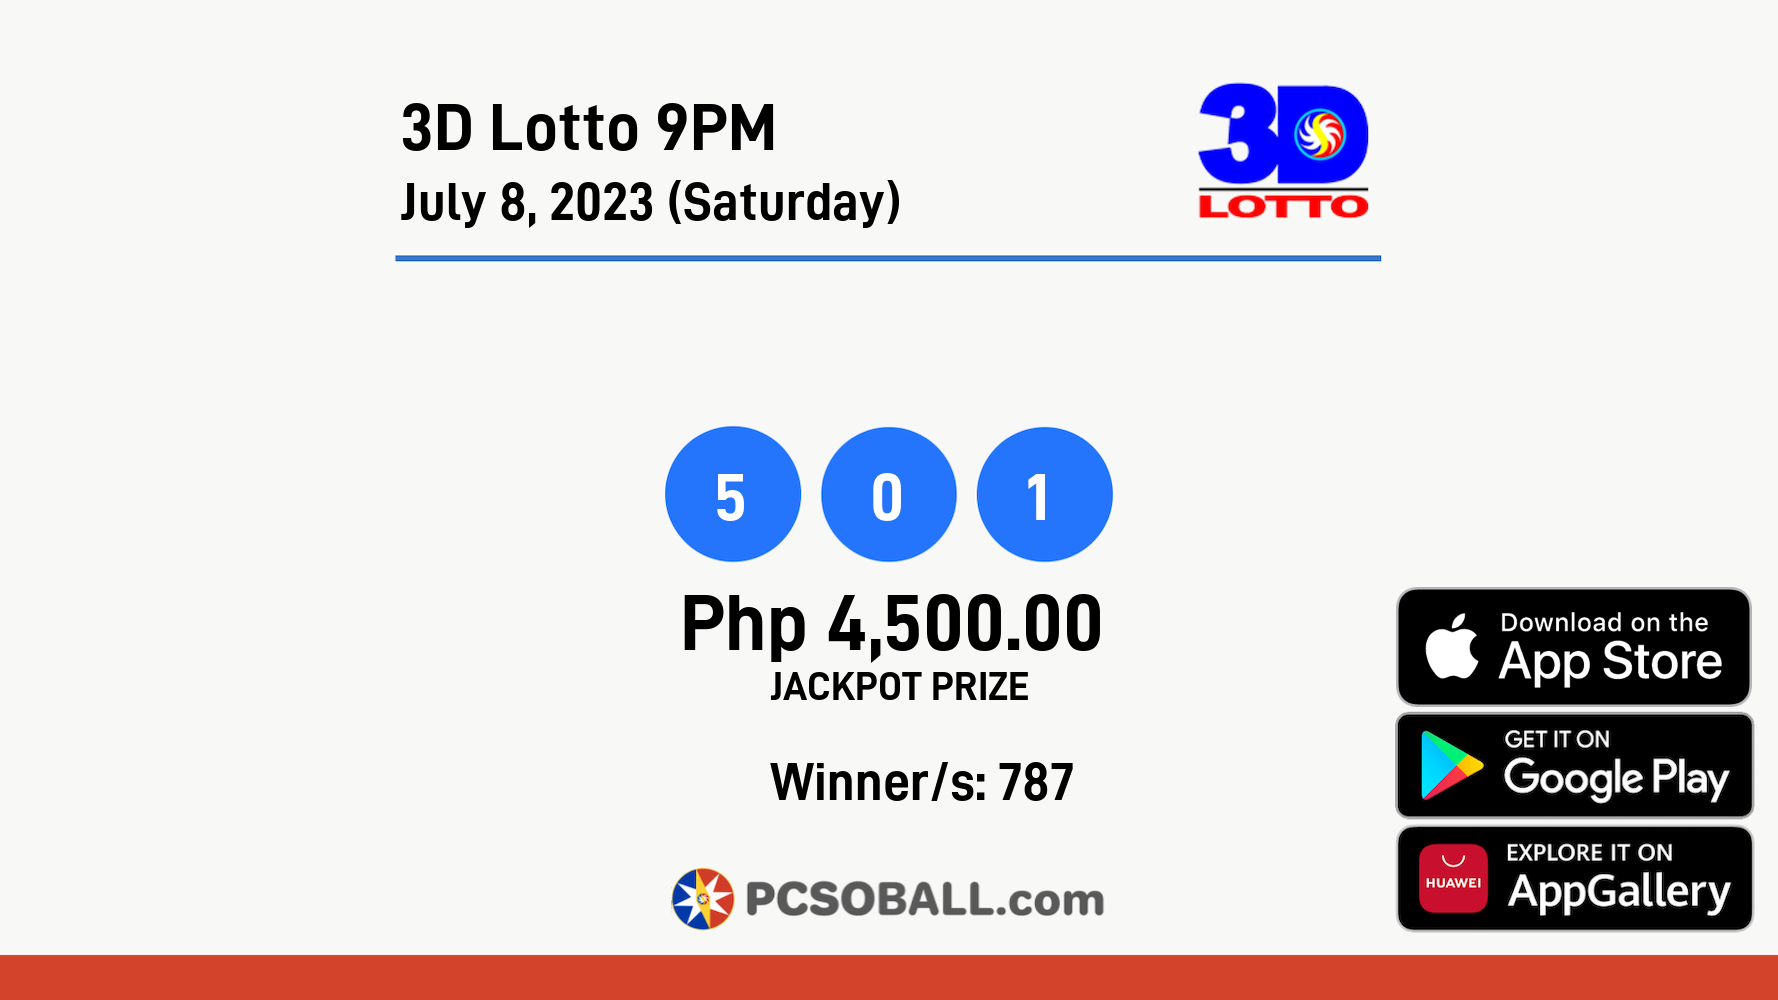 3D Lotto 9PM July 8, 2023 (Saturday) Result